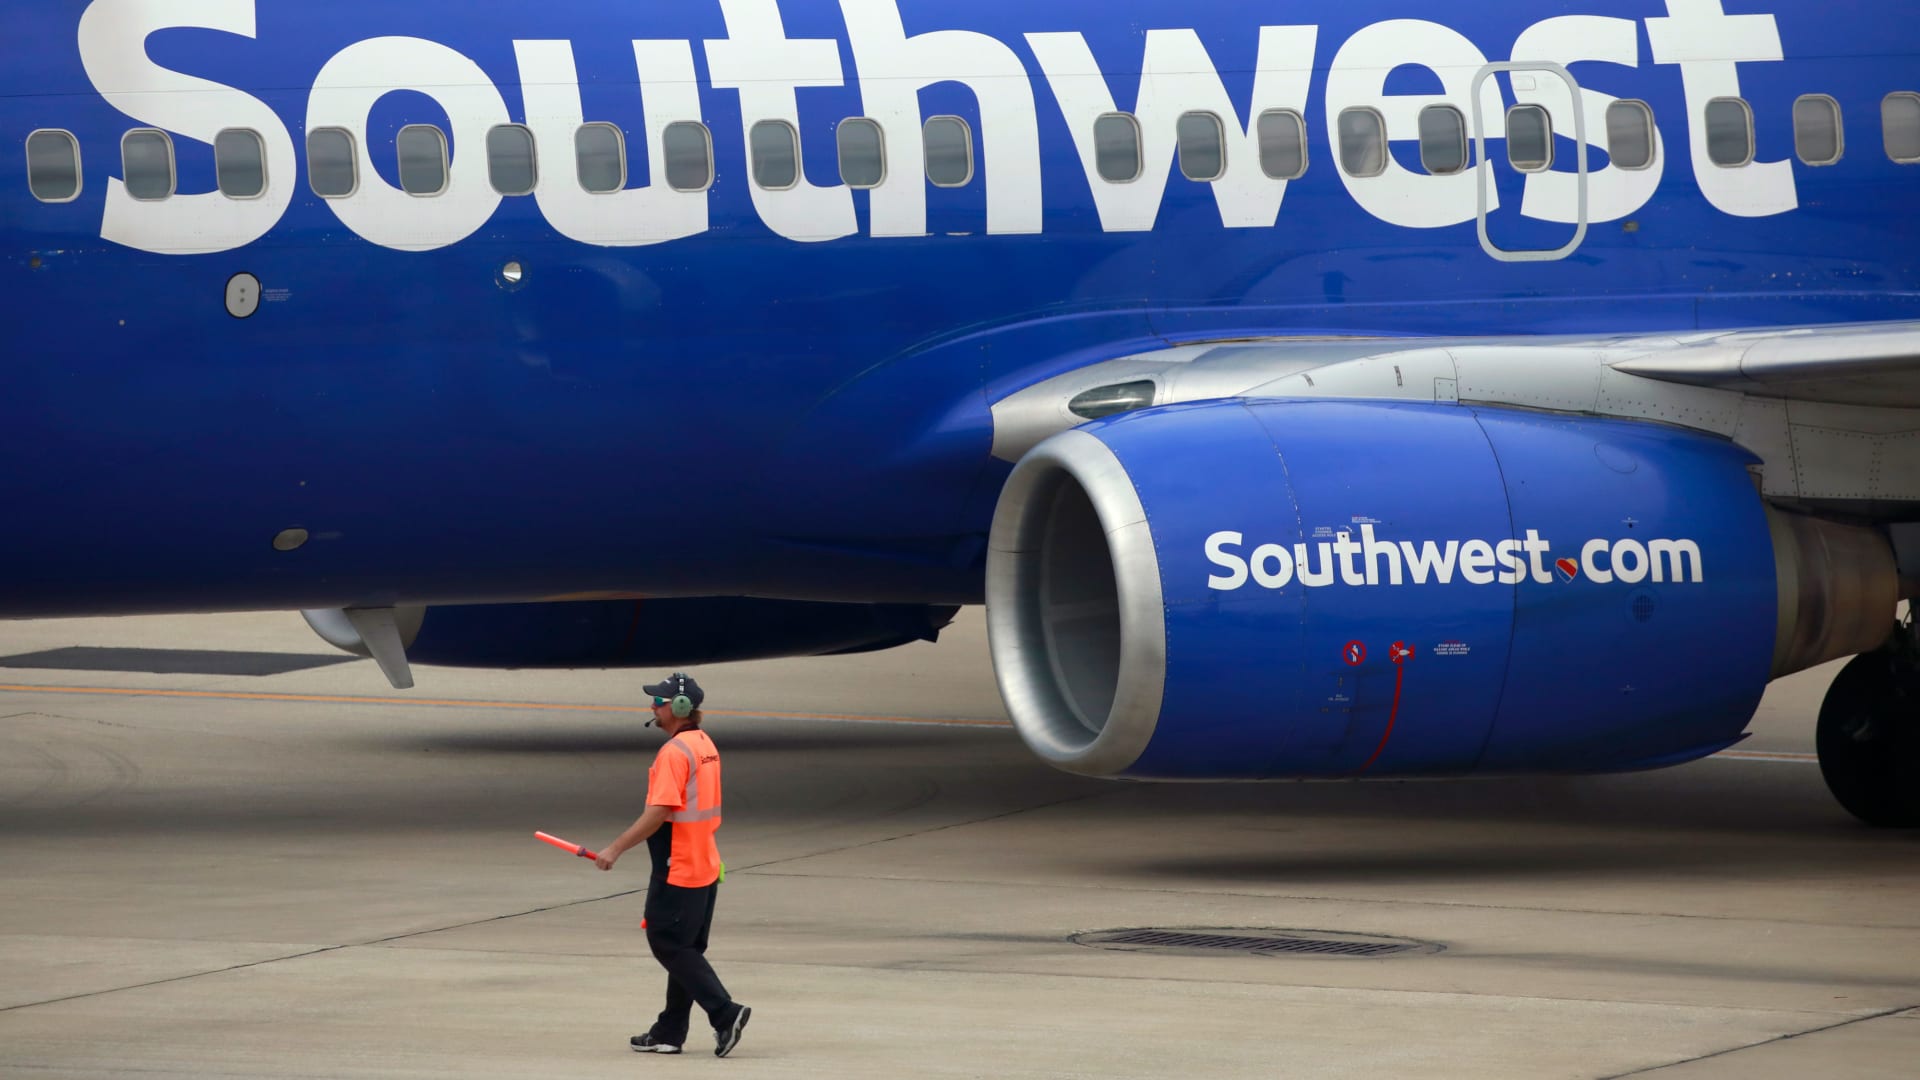 A worker directs a Southwest Airlines Boeing 737 passenger jet.